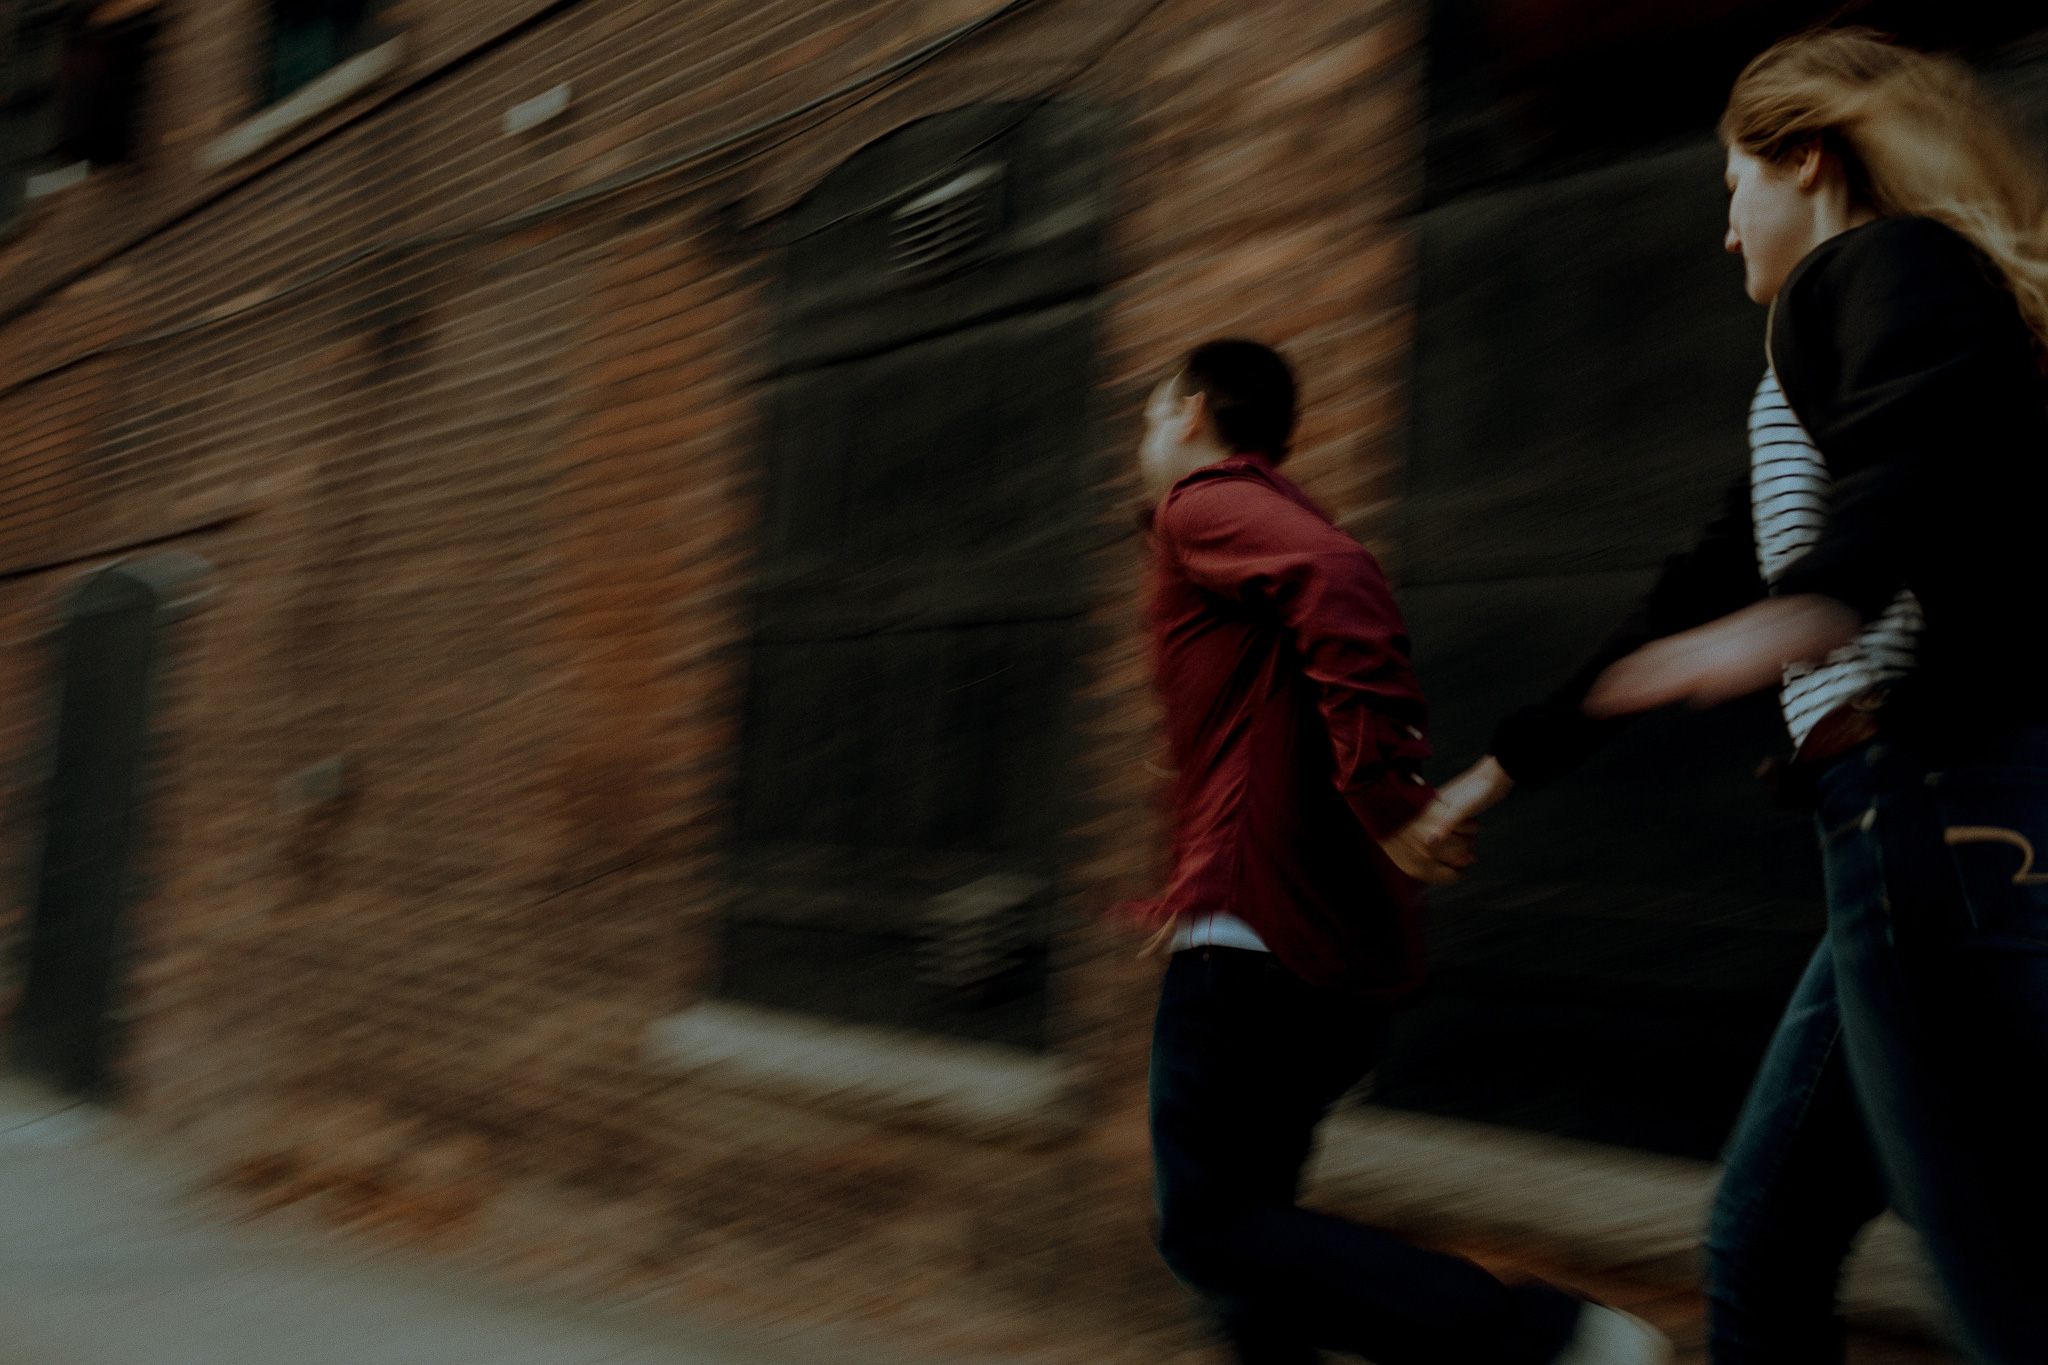 finance leads his girl while running past industrial building